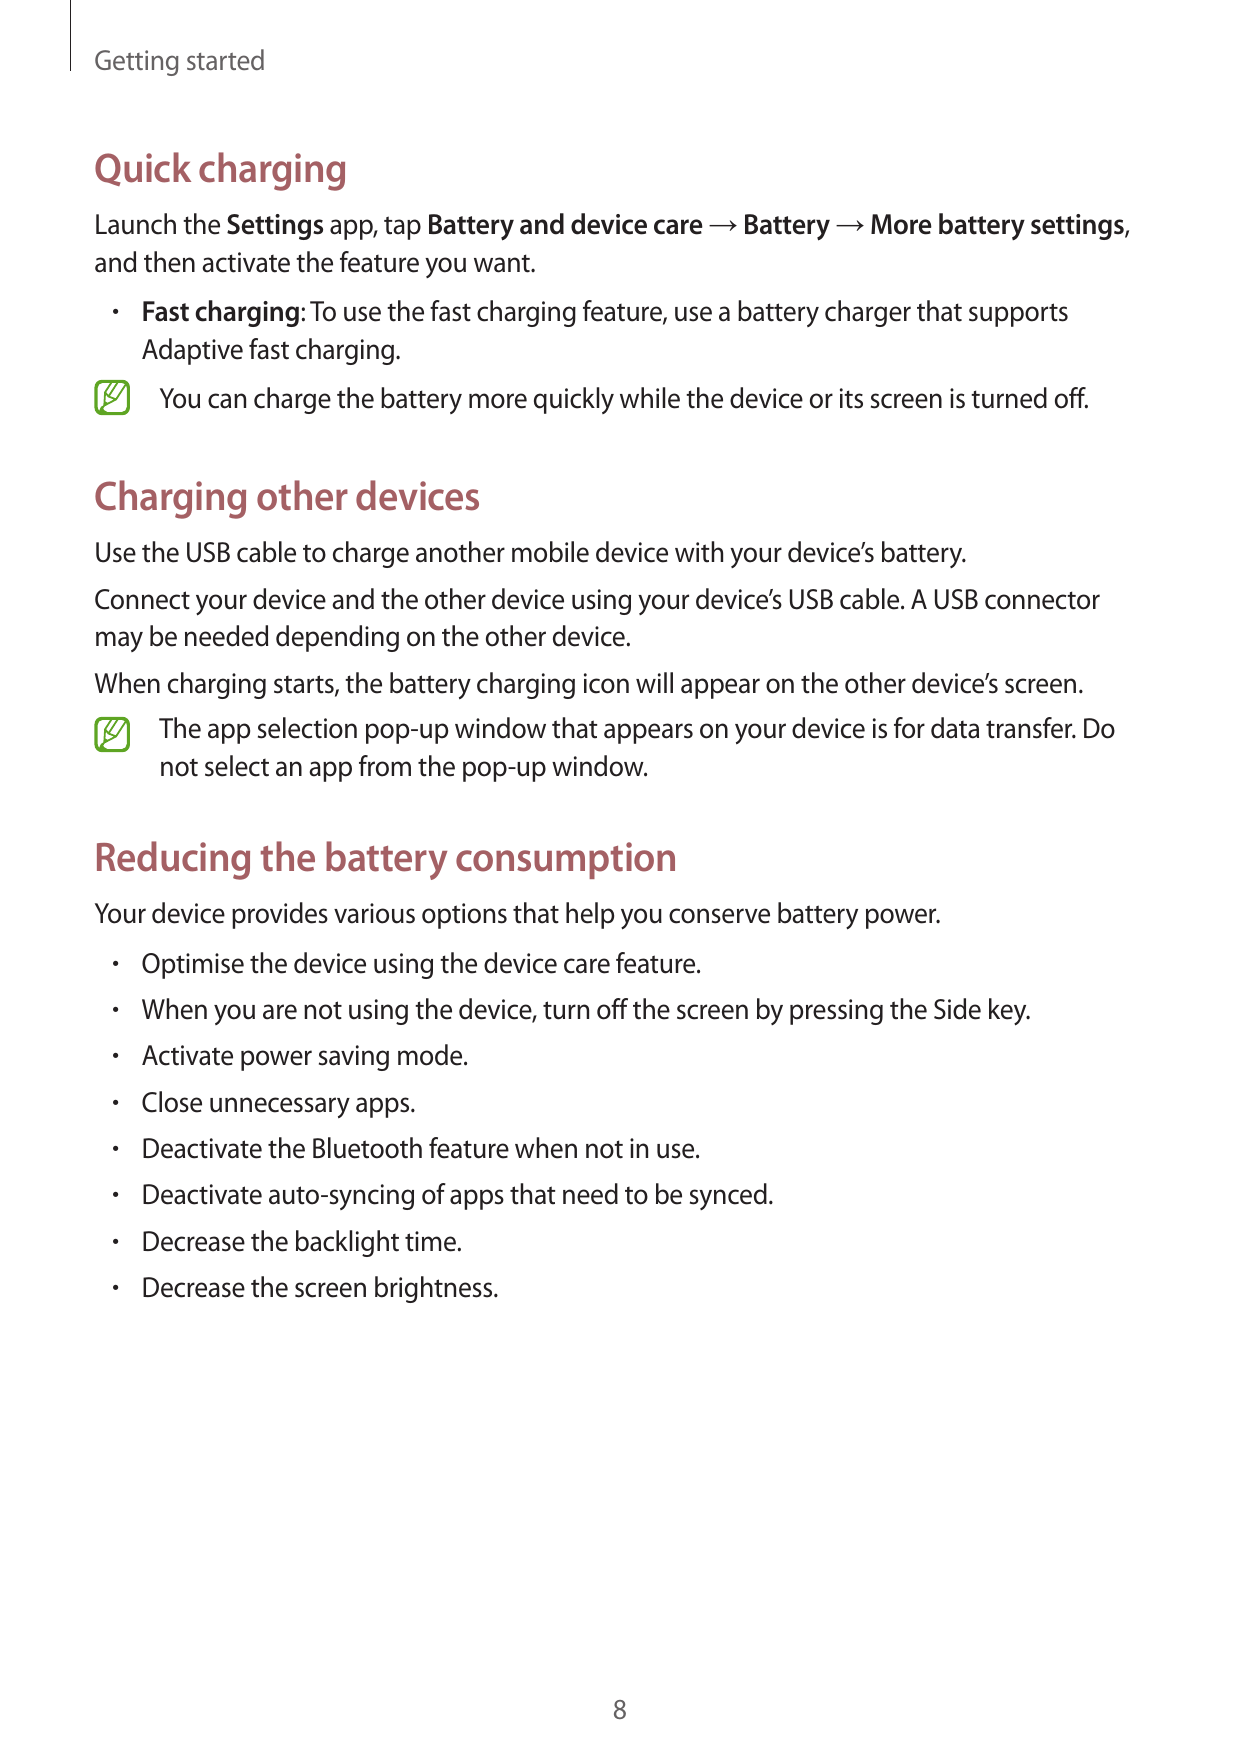 Getting startedQuick chargingLaunch the Settings app, tap Battery and device care → Battery → More battery settings,and then act